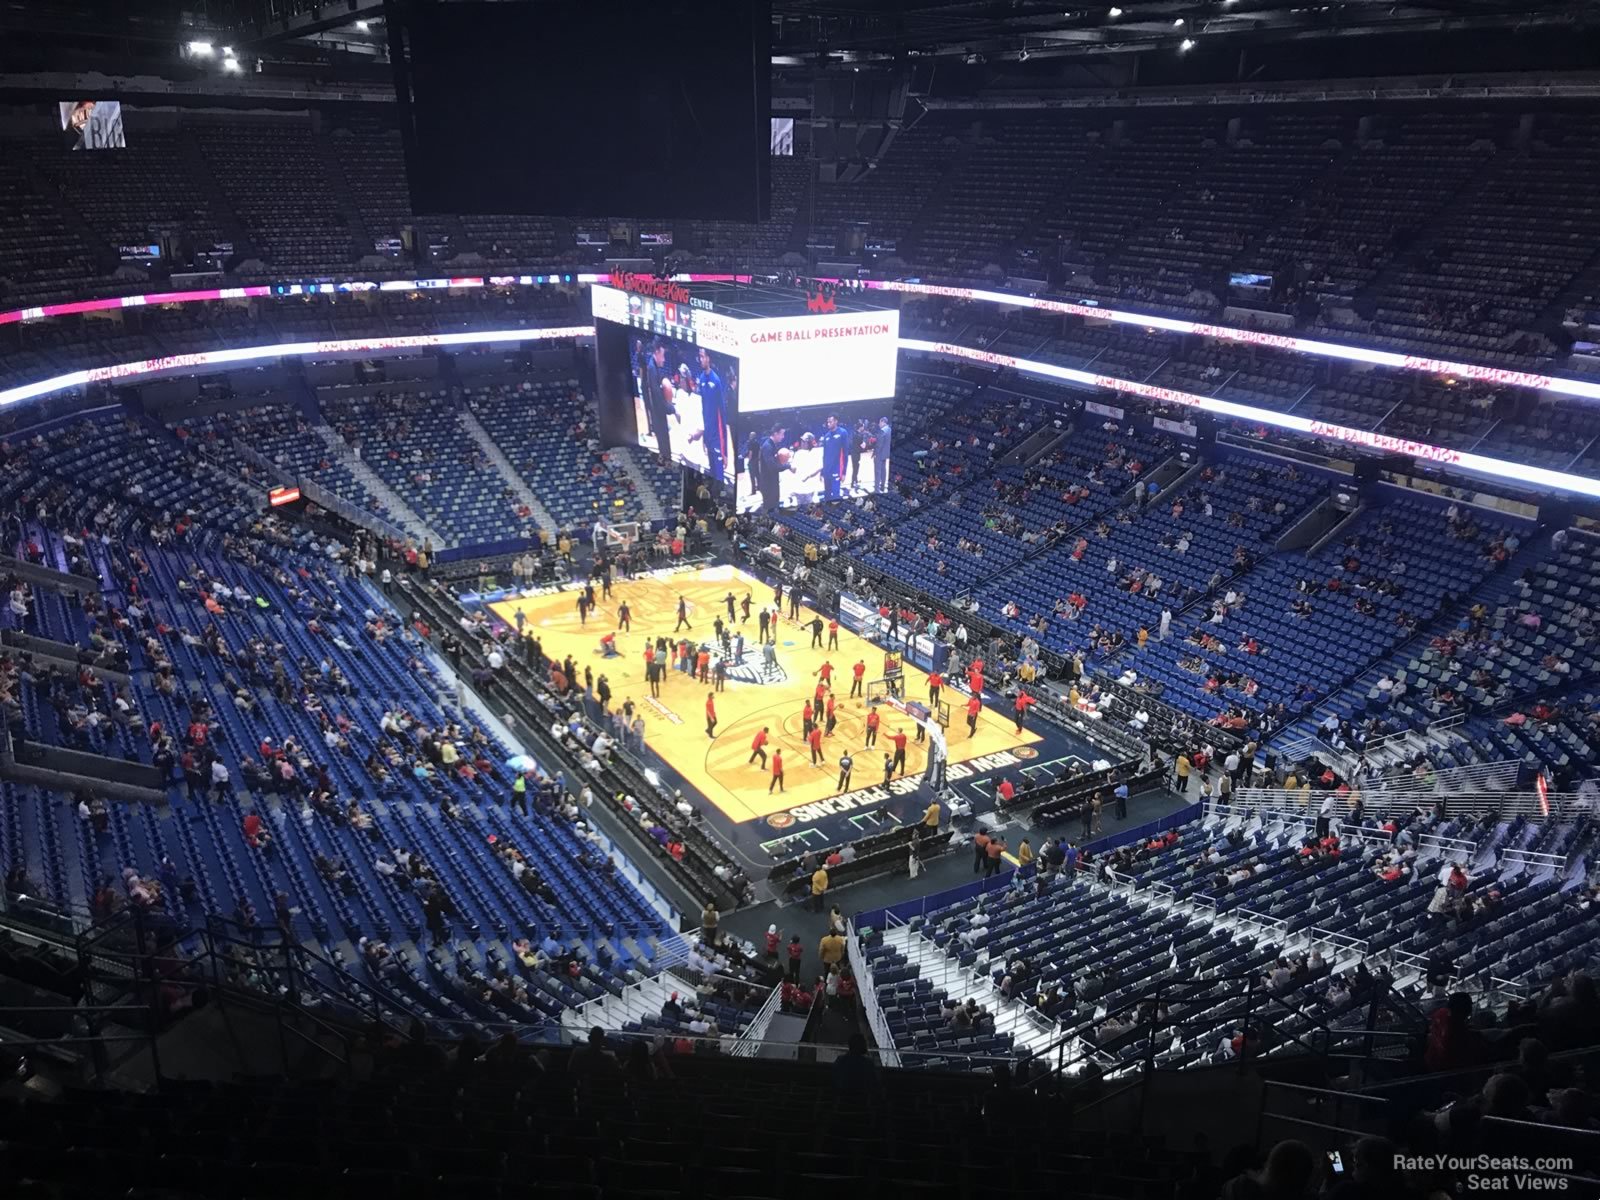 section 327, row 16 seat view  for basketball - smoothie king center